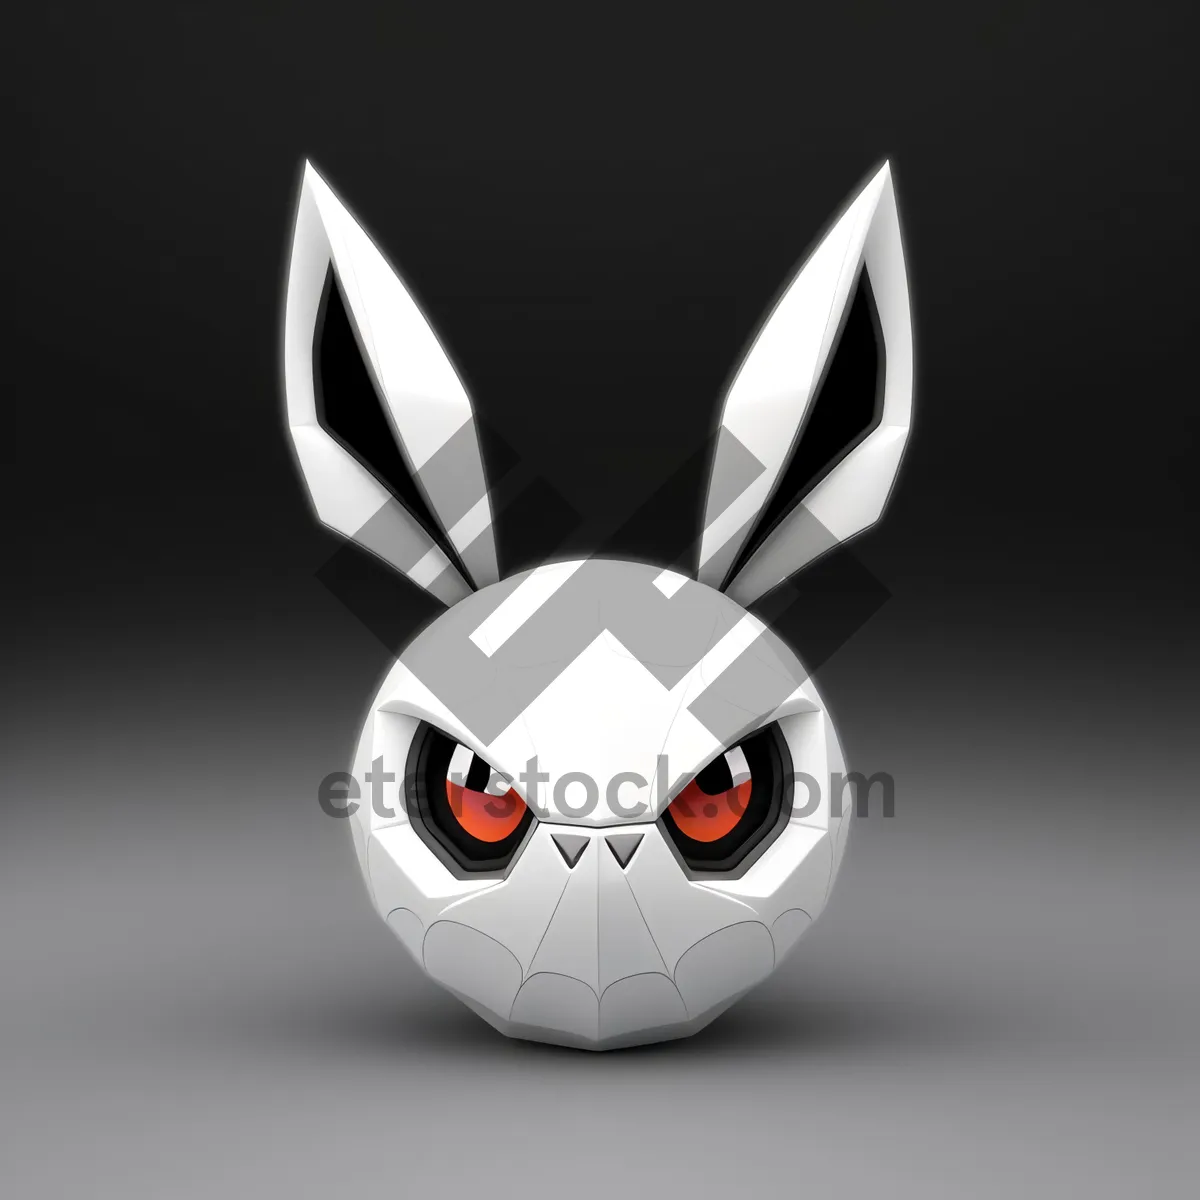 Picture of Eyebrow-Icon-Rabbit: Cute and Funny Cartoon Character